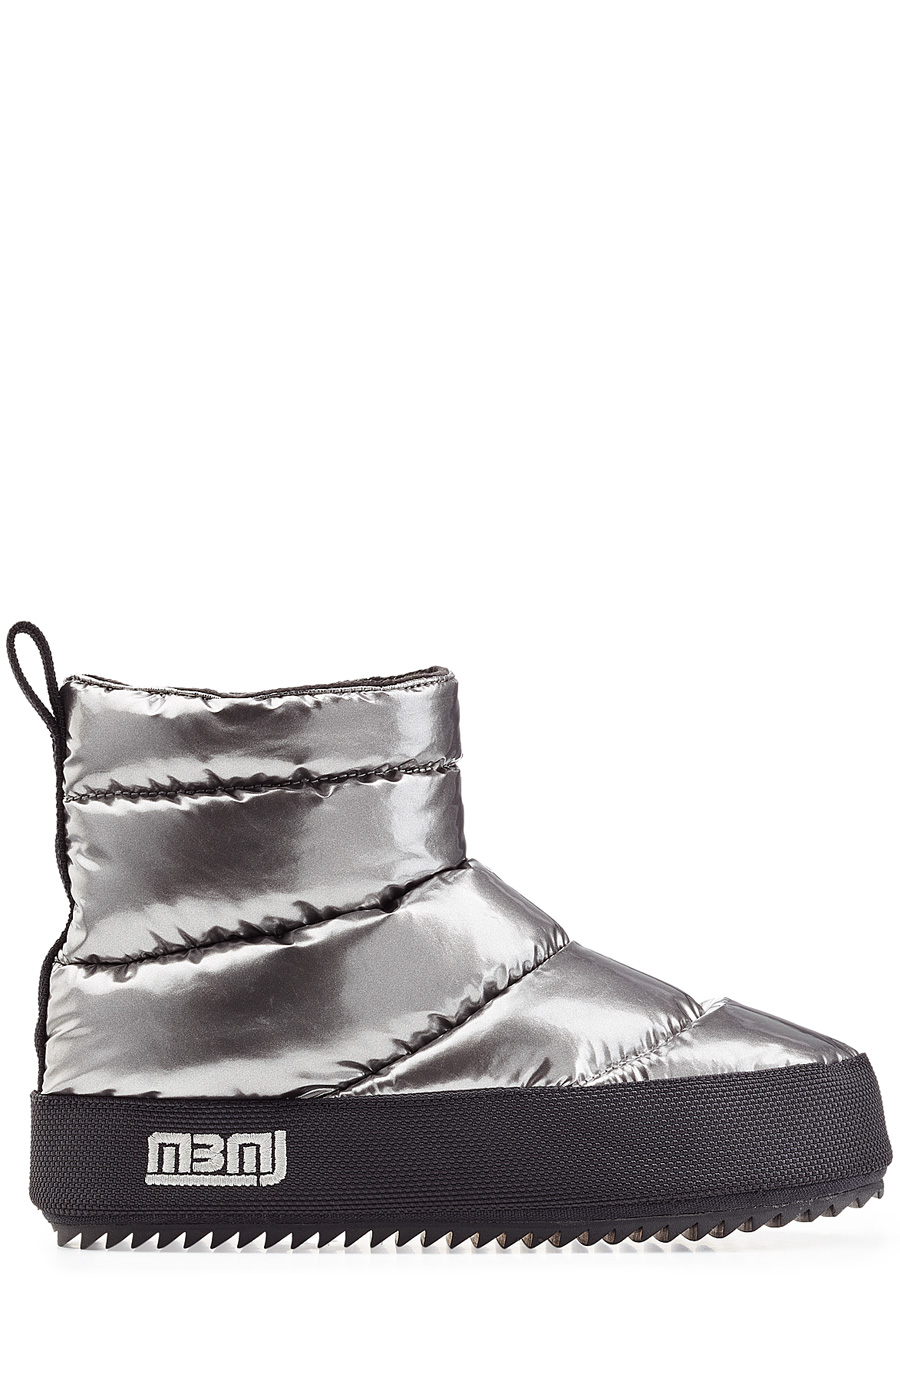 marc jacobs silver boots